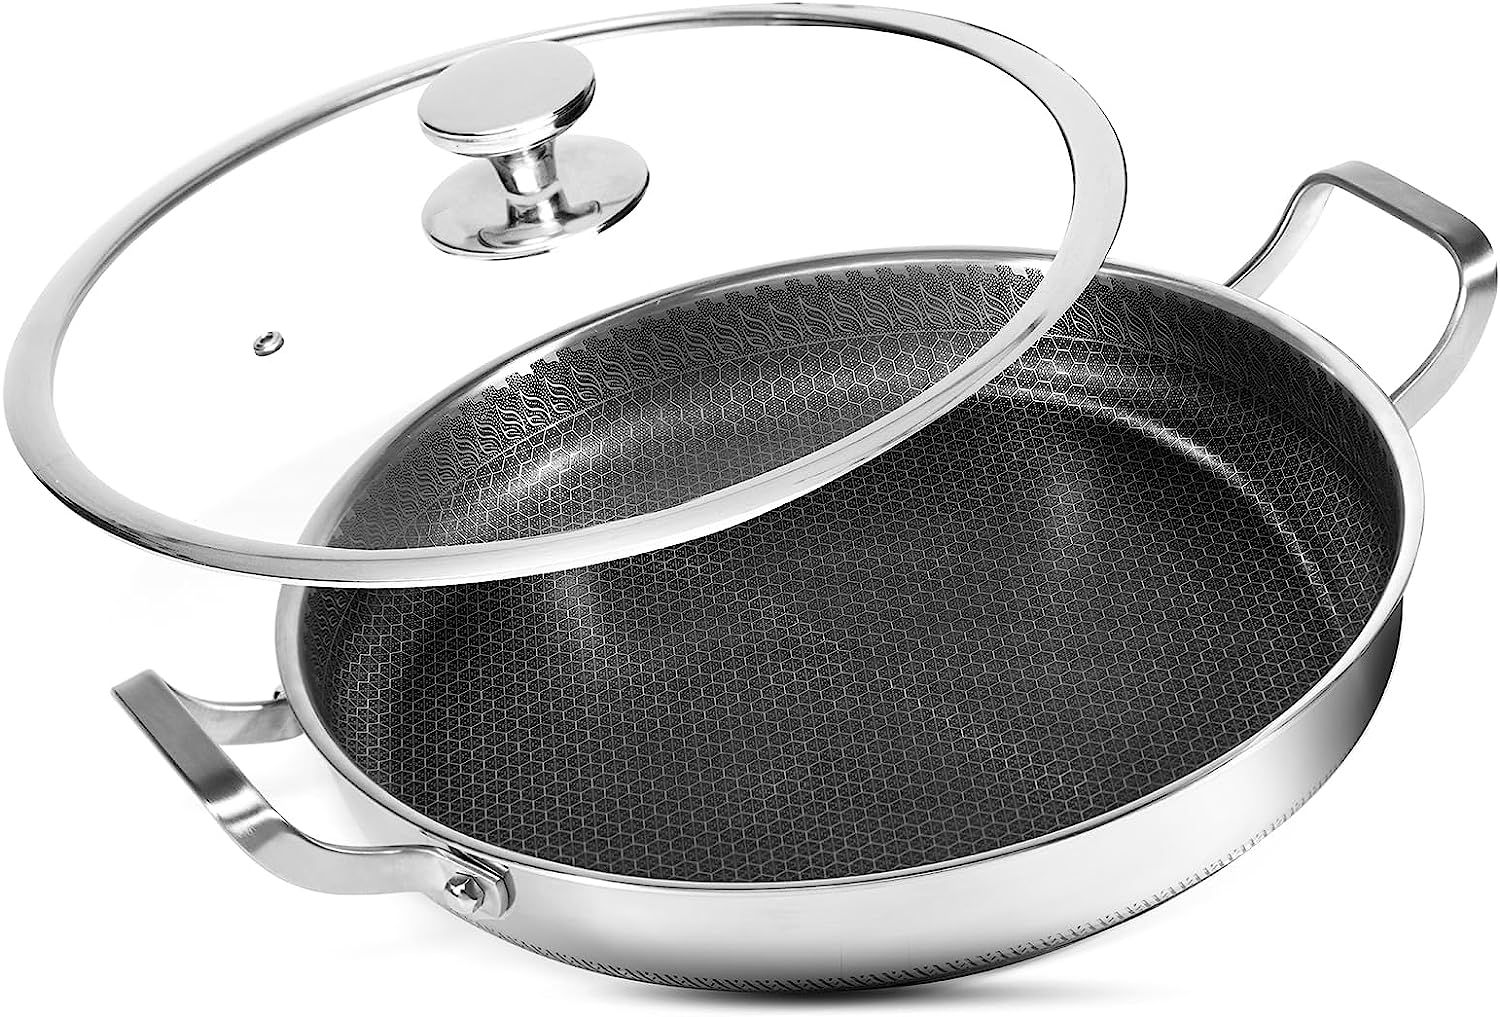 Jovos 12.5-inch Stainless Steel Frying Pan 4 QT Saute [...]